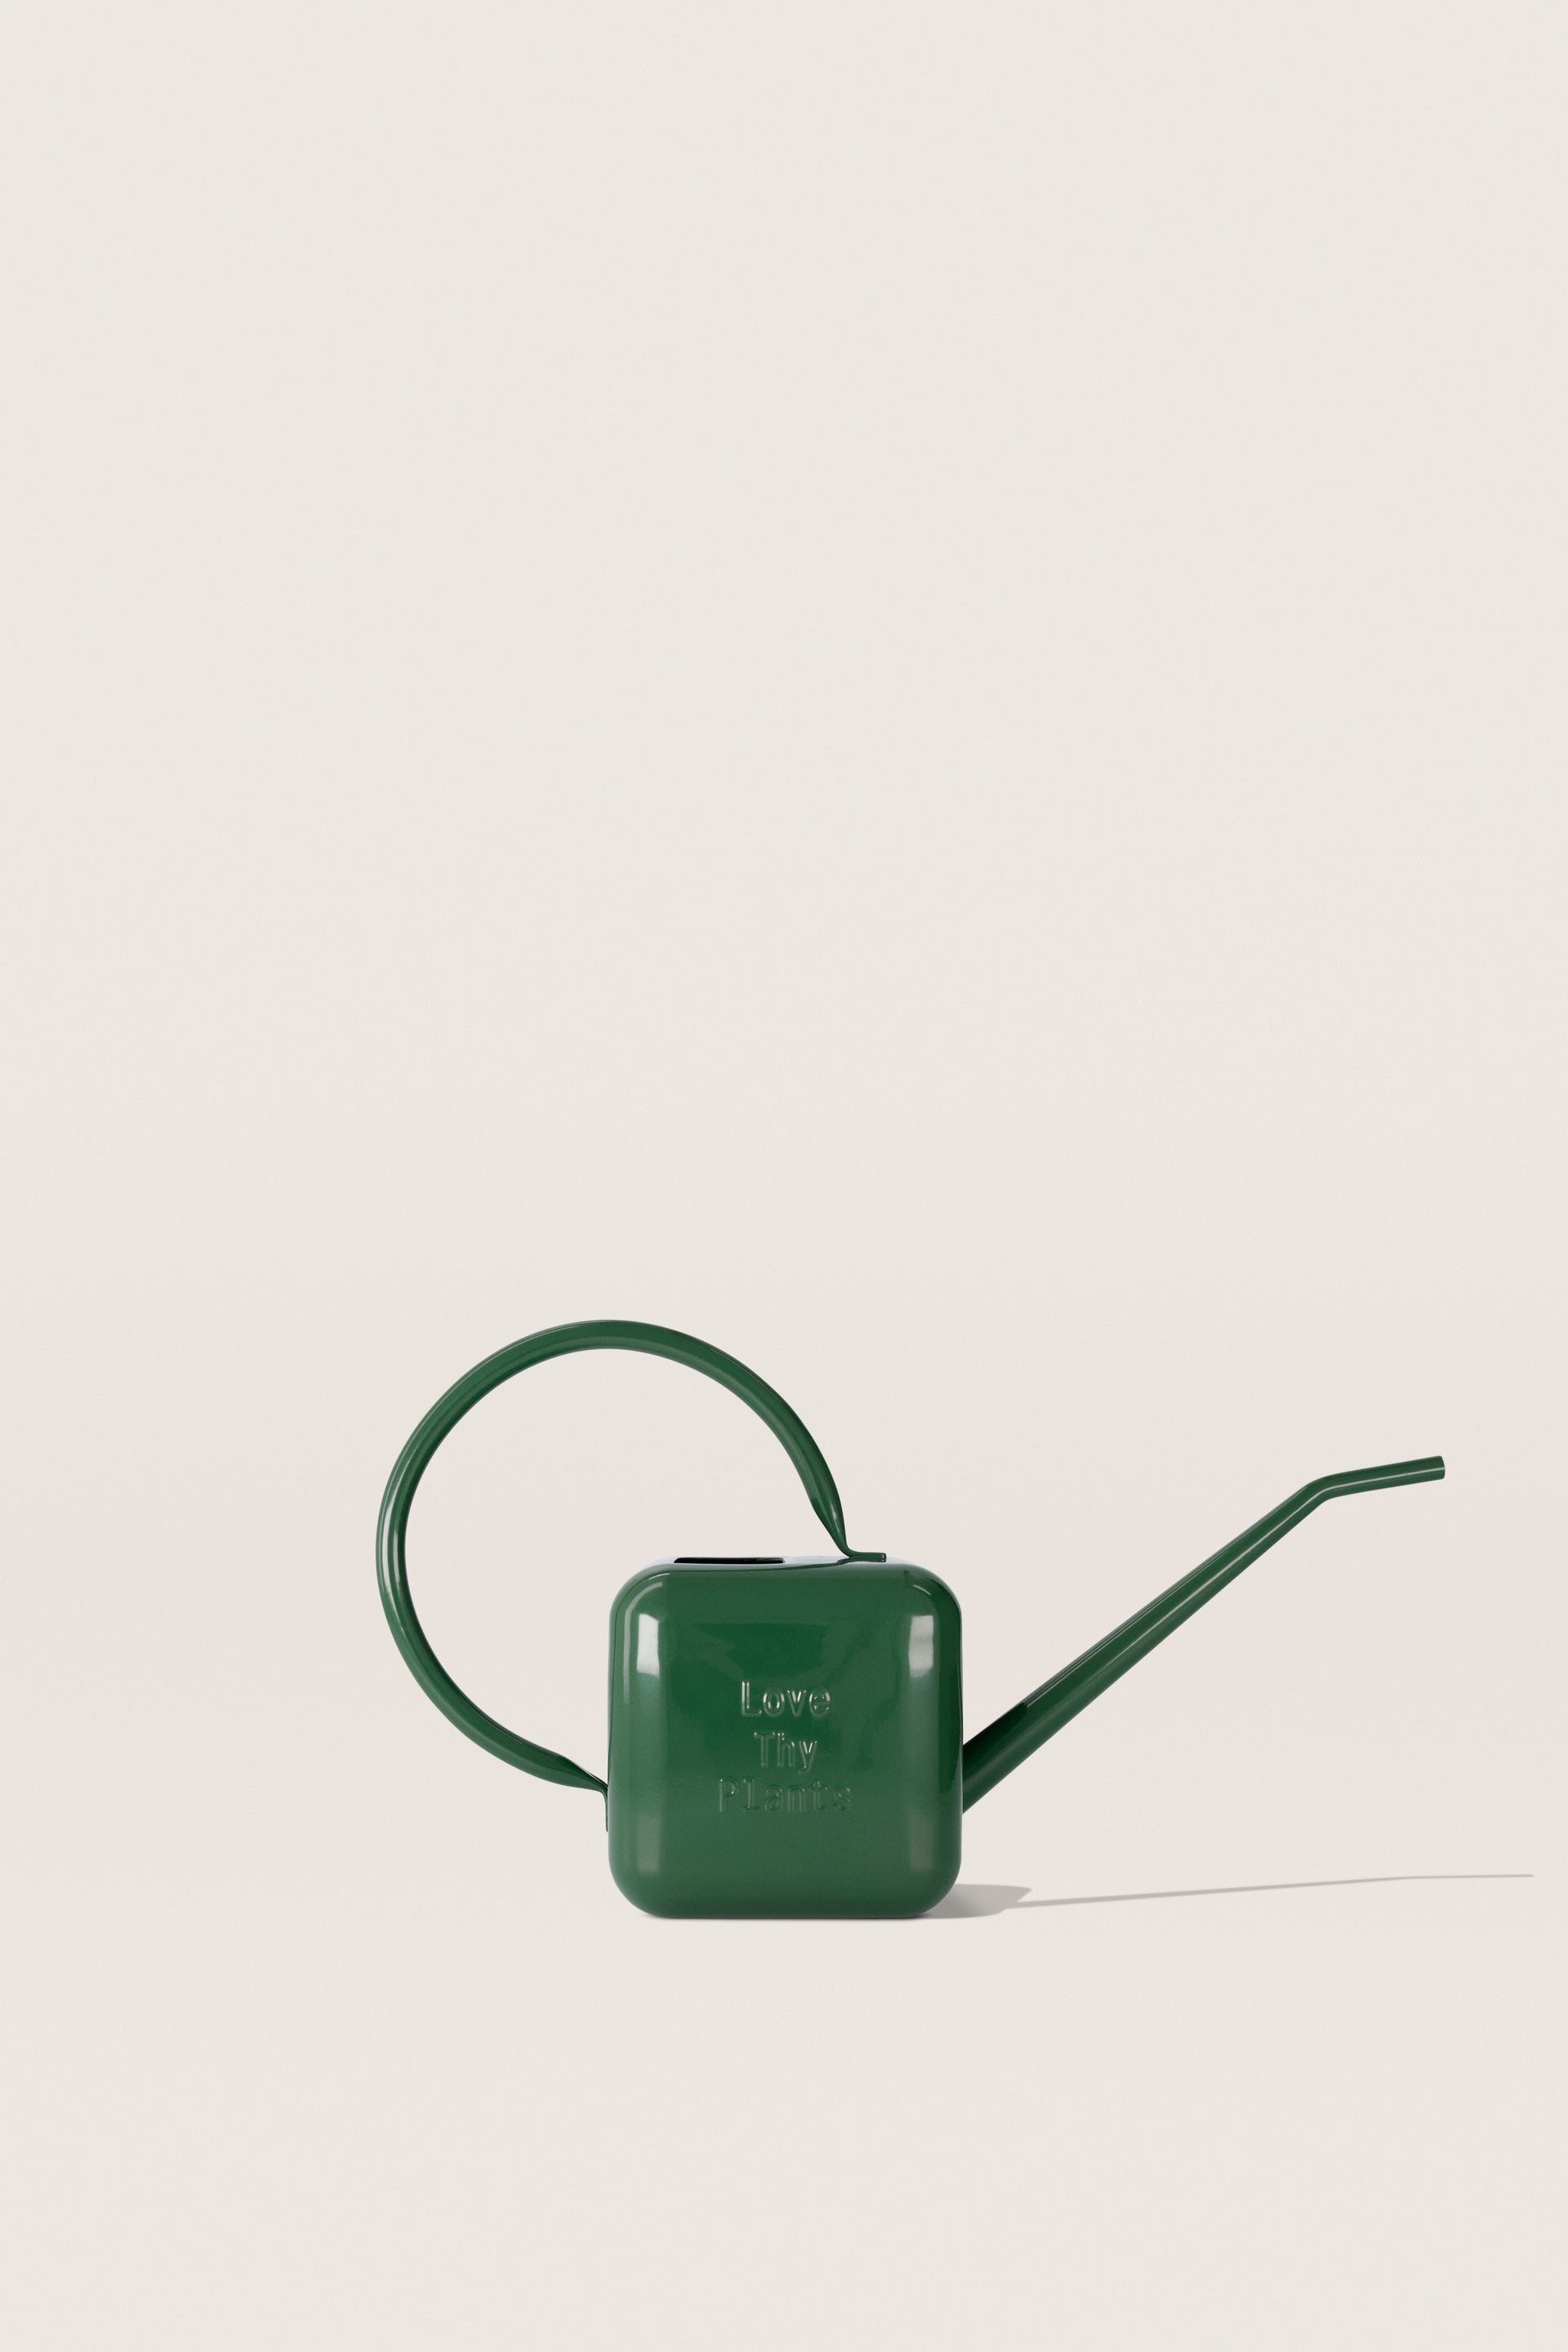 Sowvital green watering can.